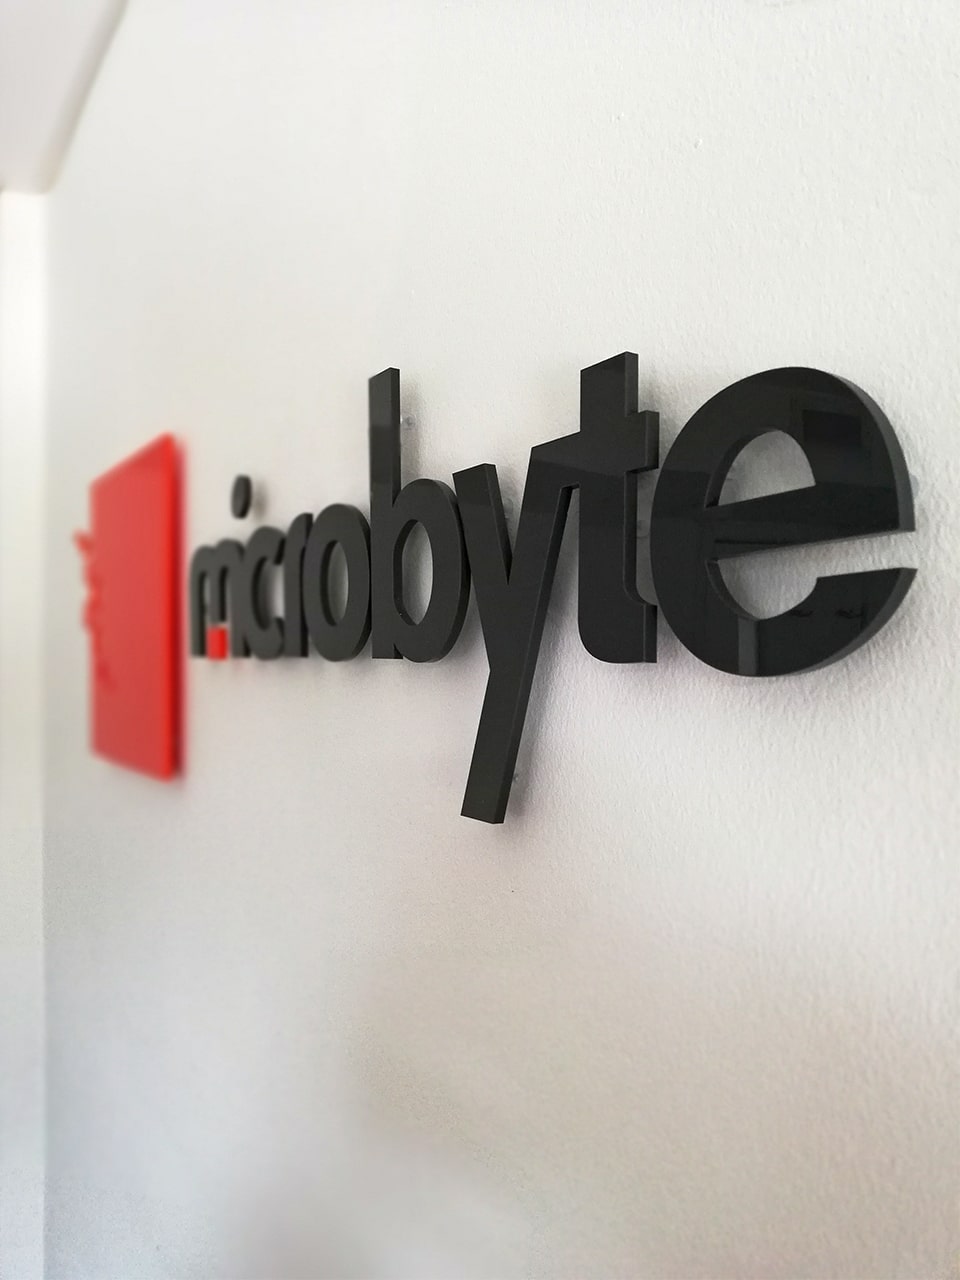 Microbyte 3D lettering